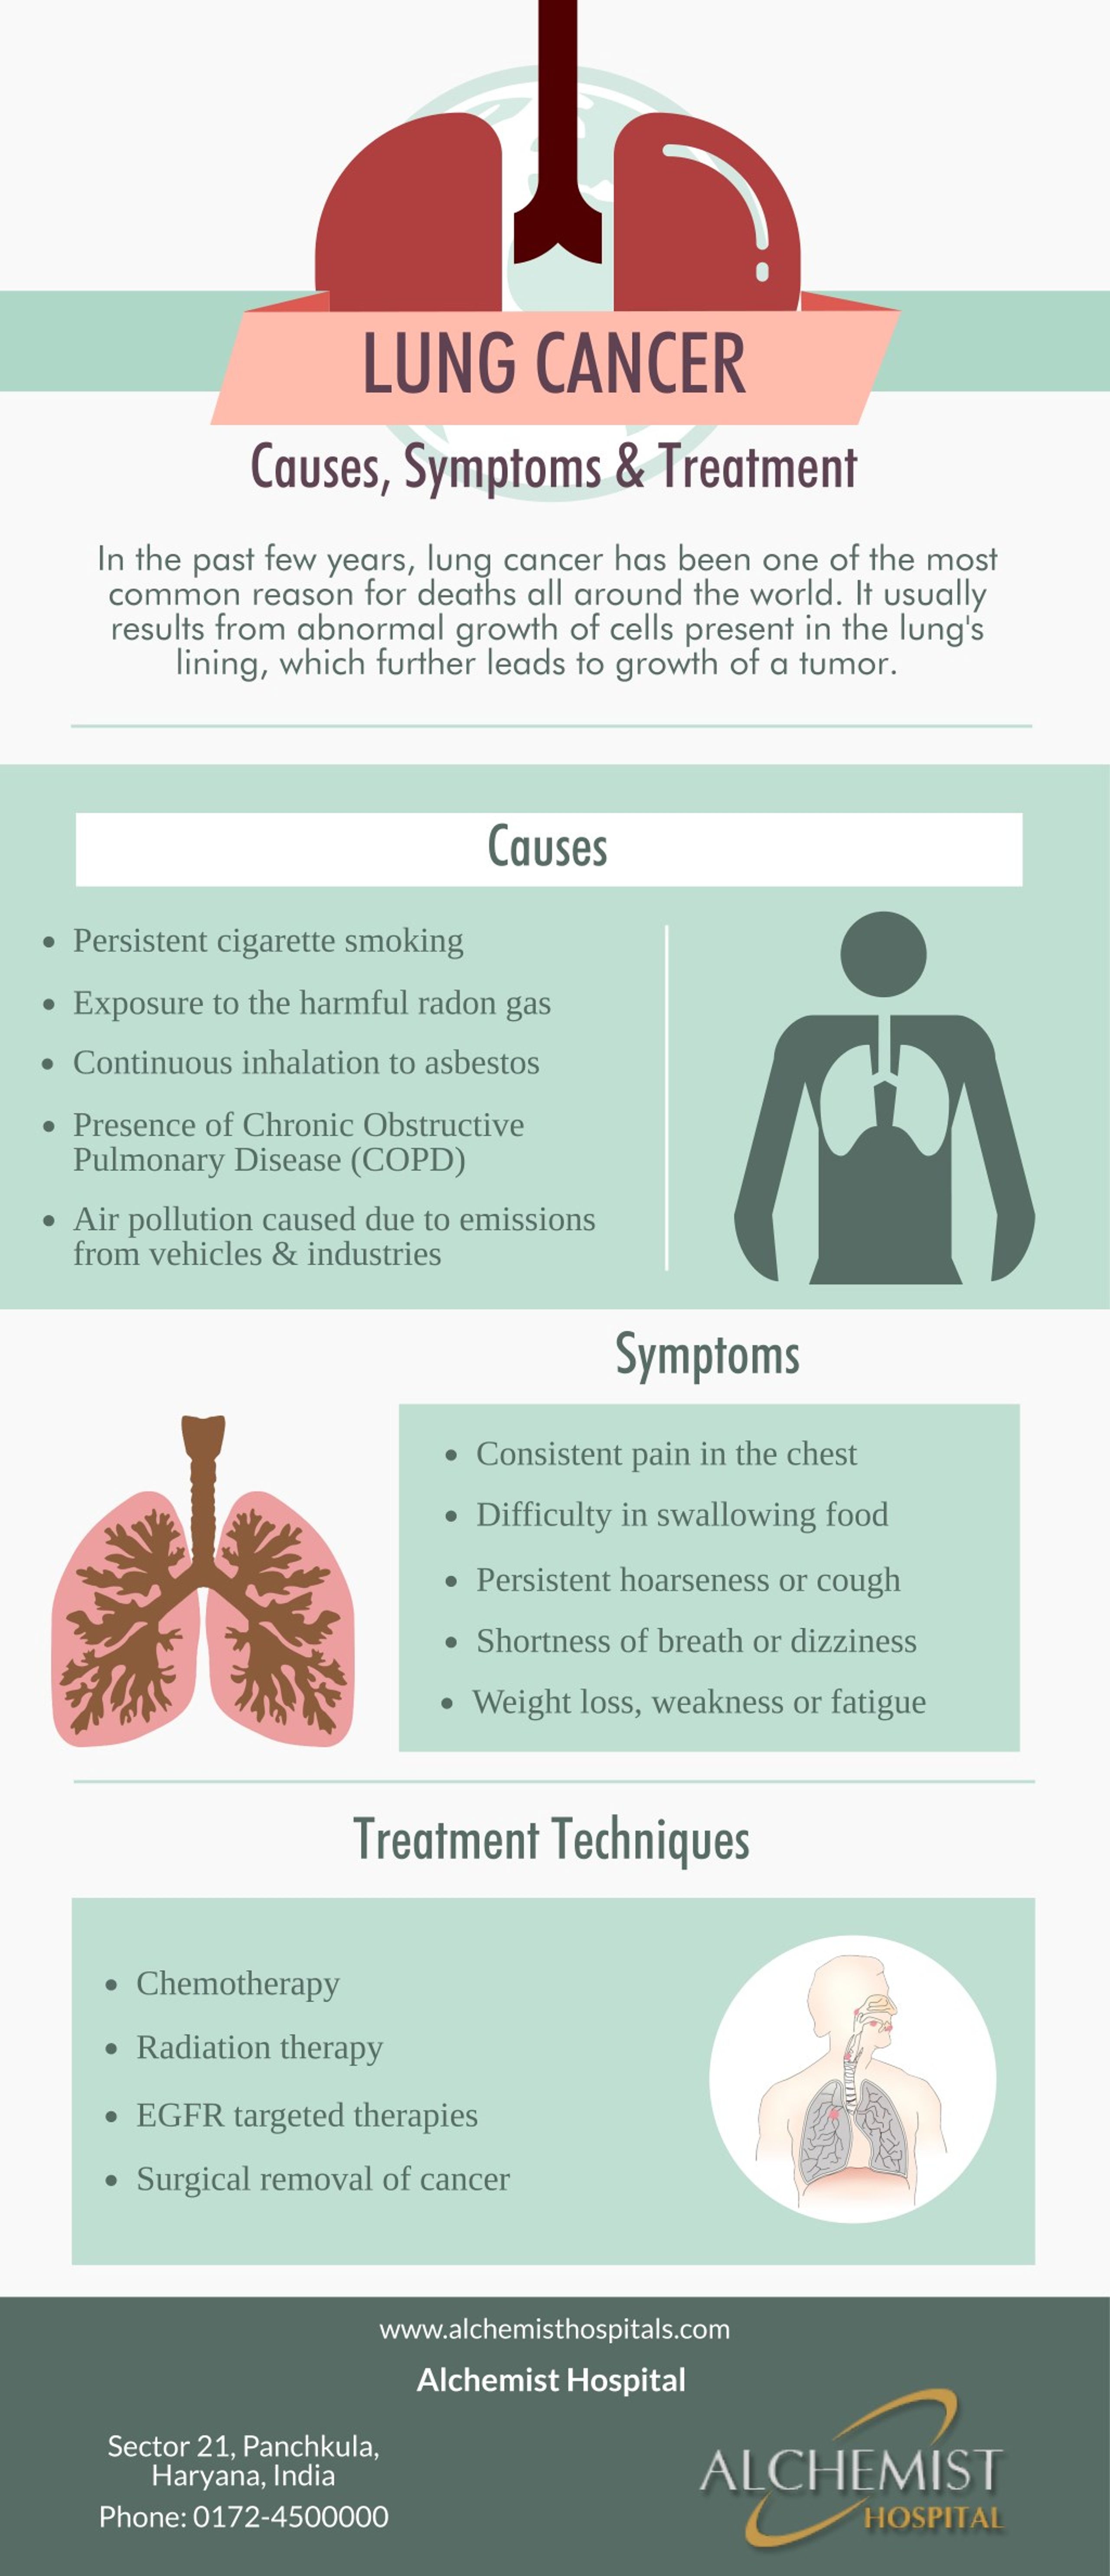 case study on lung cancer ppt